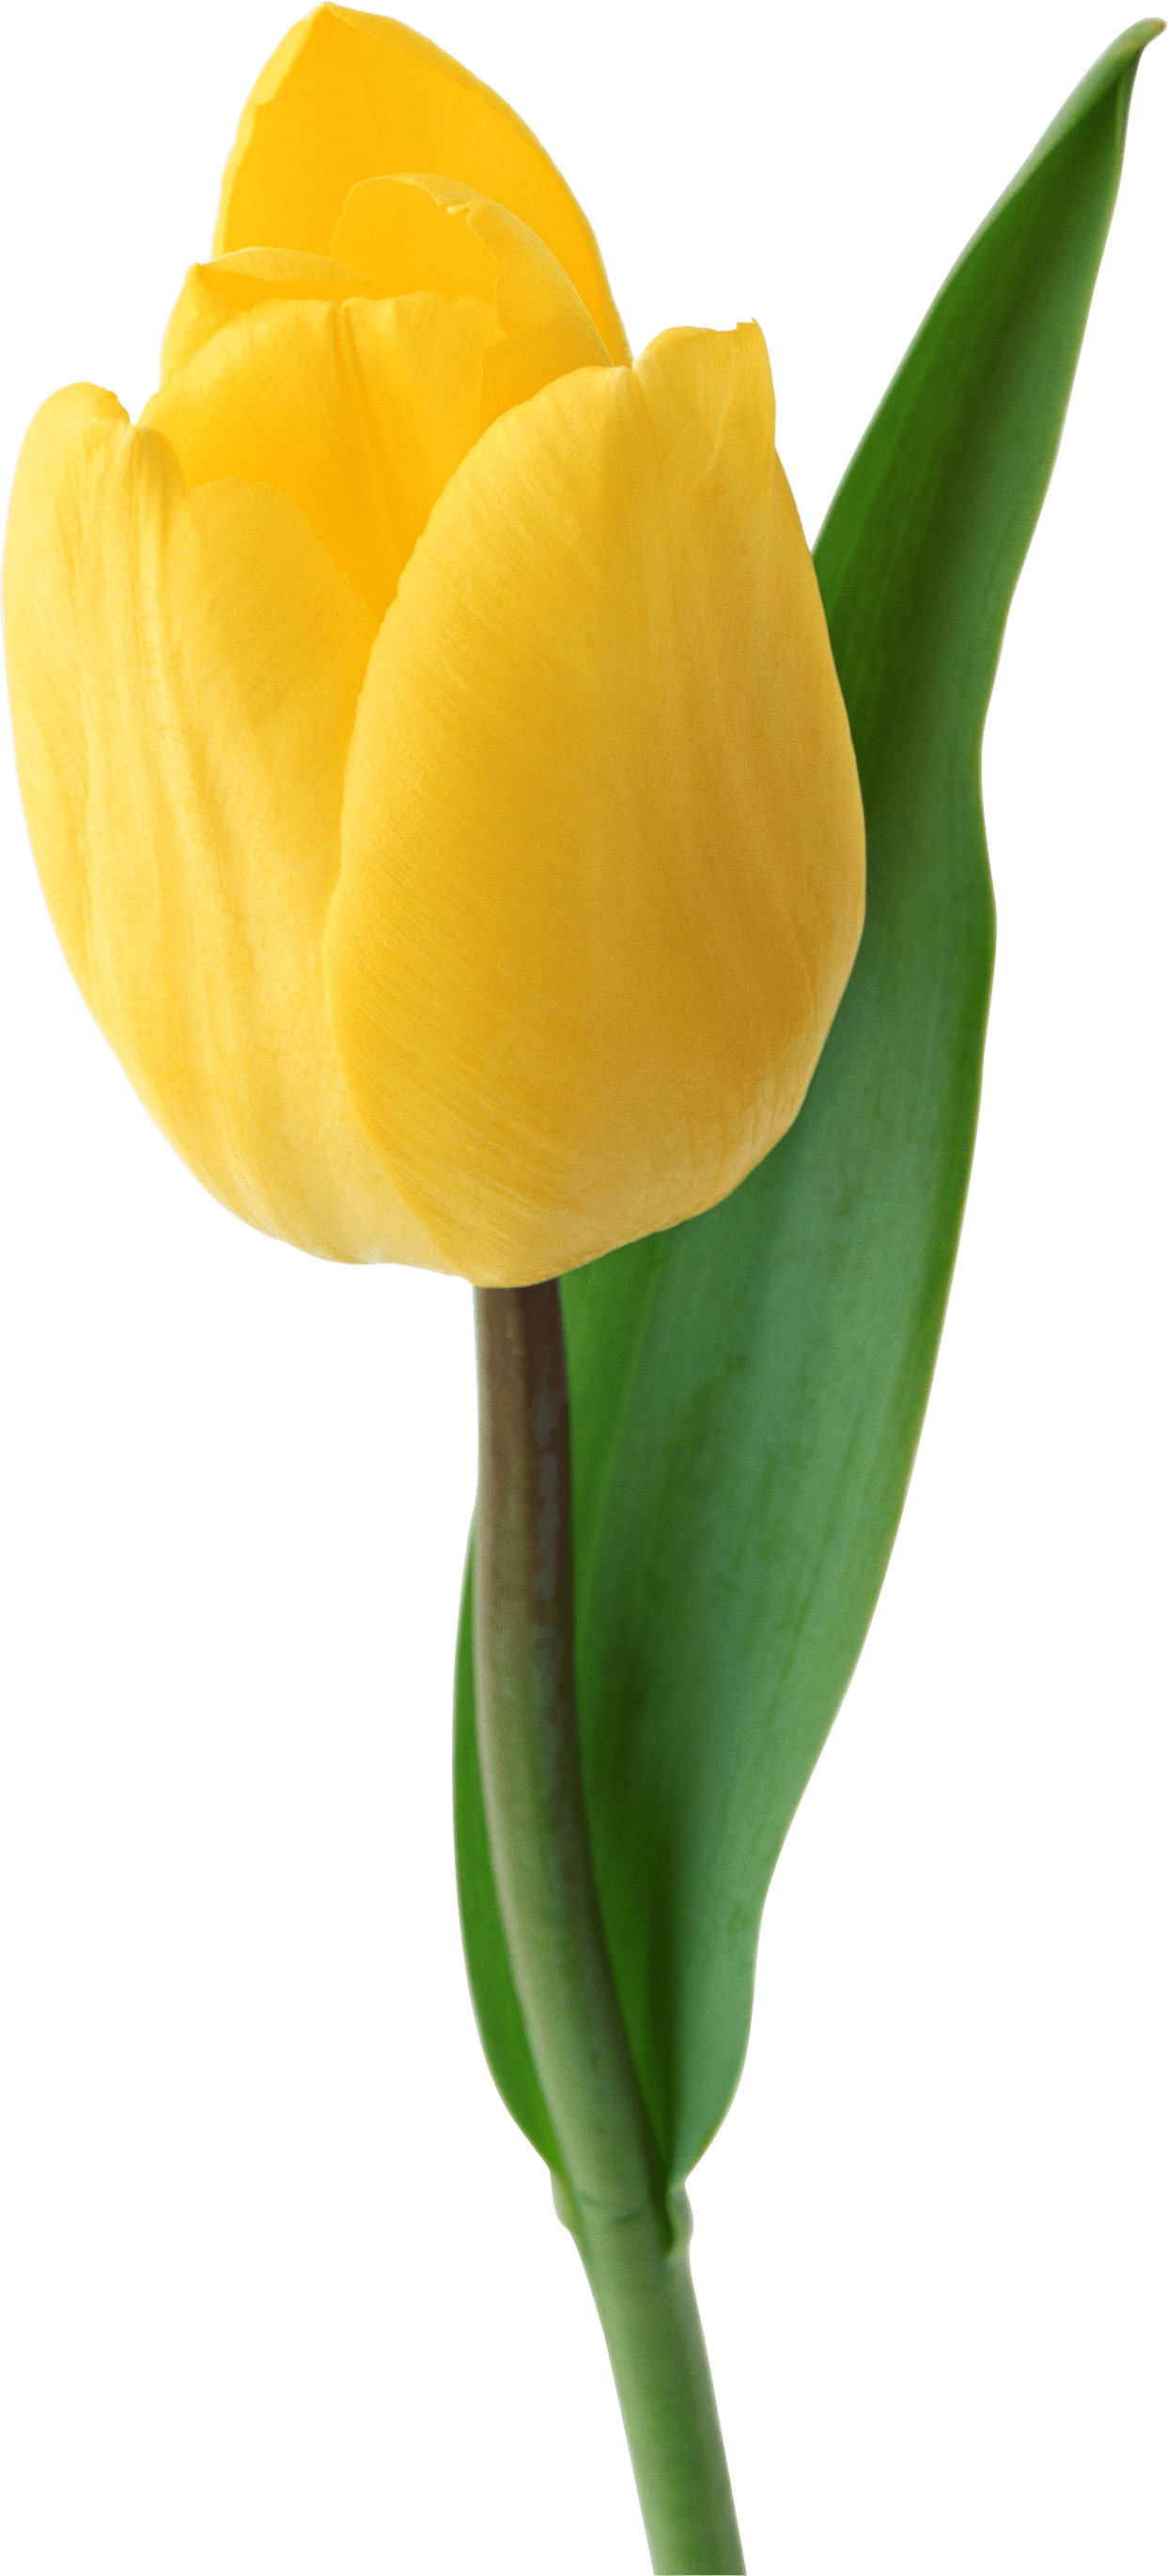 A Yellow Tulip With Green Leaves